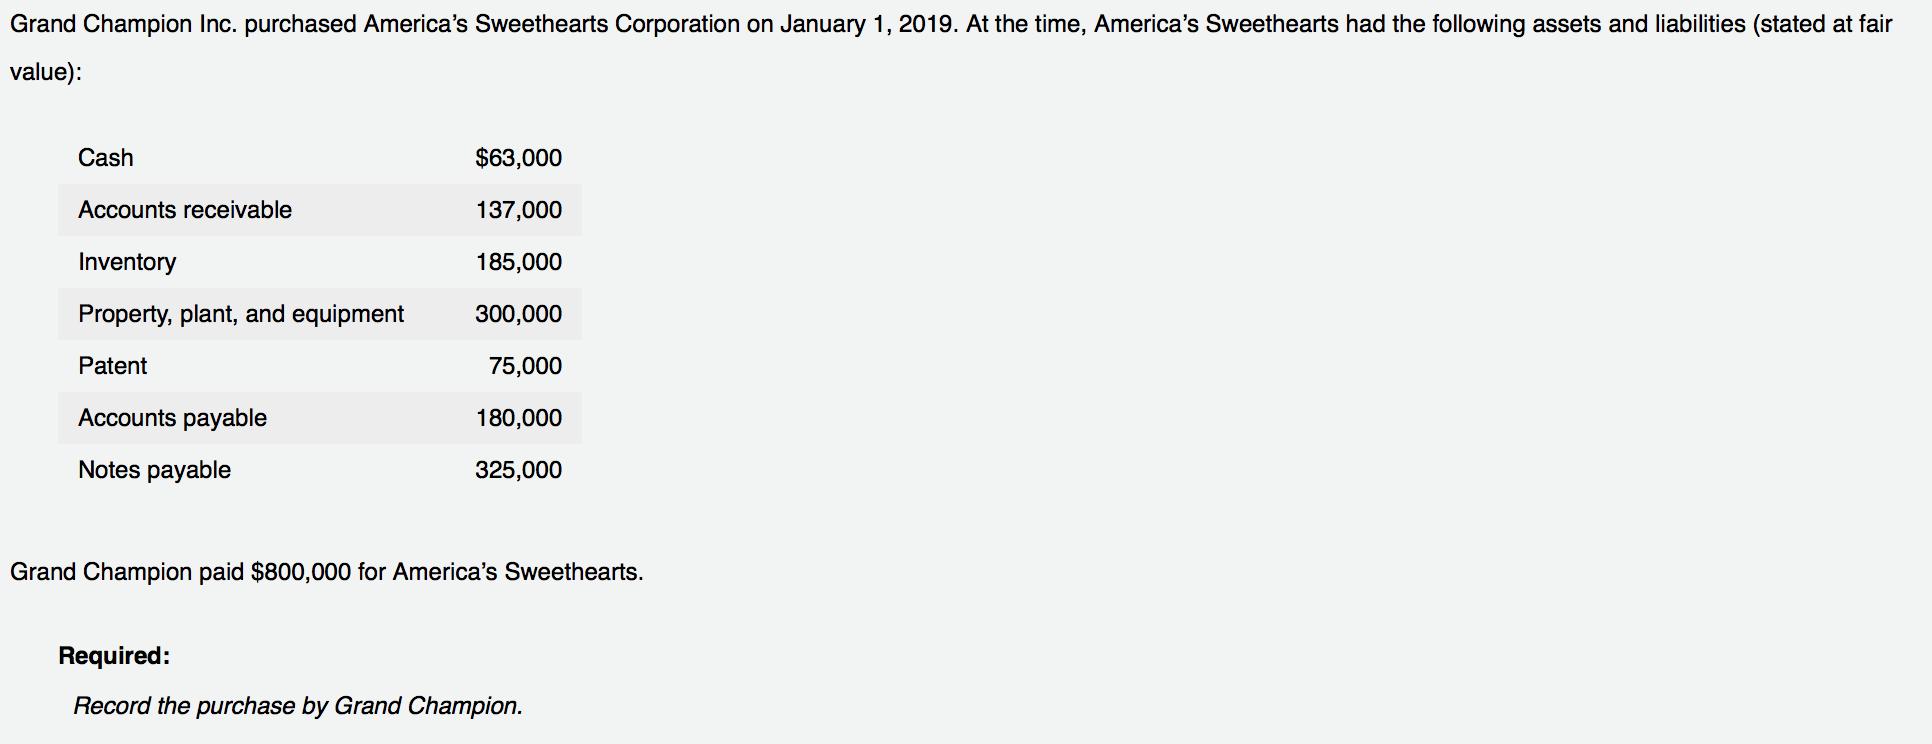 Grand Champion Inc. purchased Americas Sweethearts Corporation on January 1, 2019. At the time, Americas Sweethearts had th